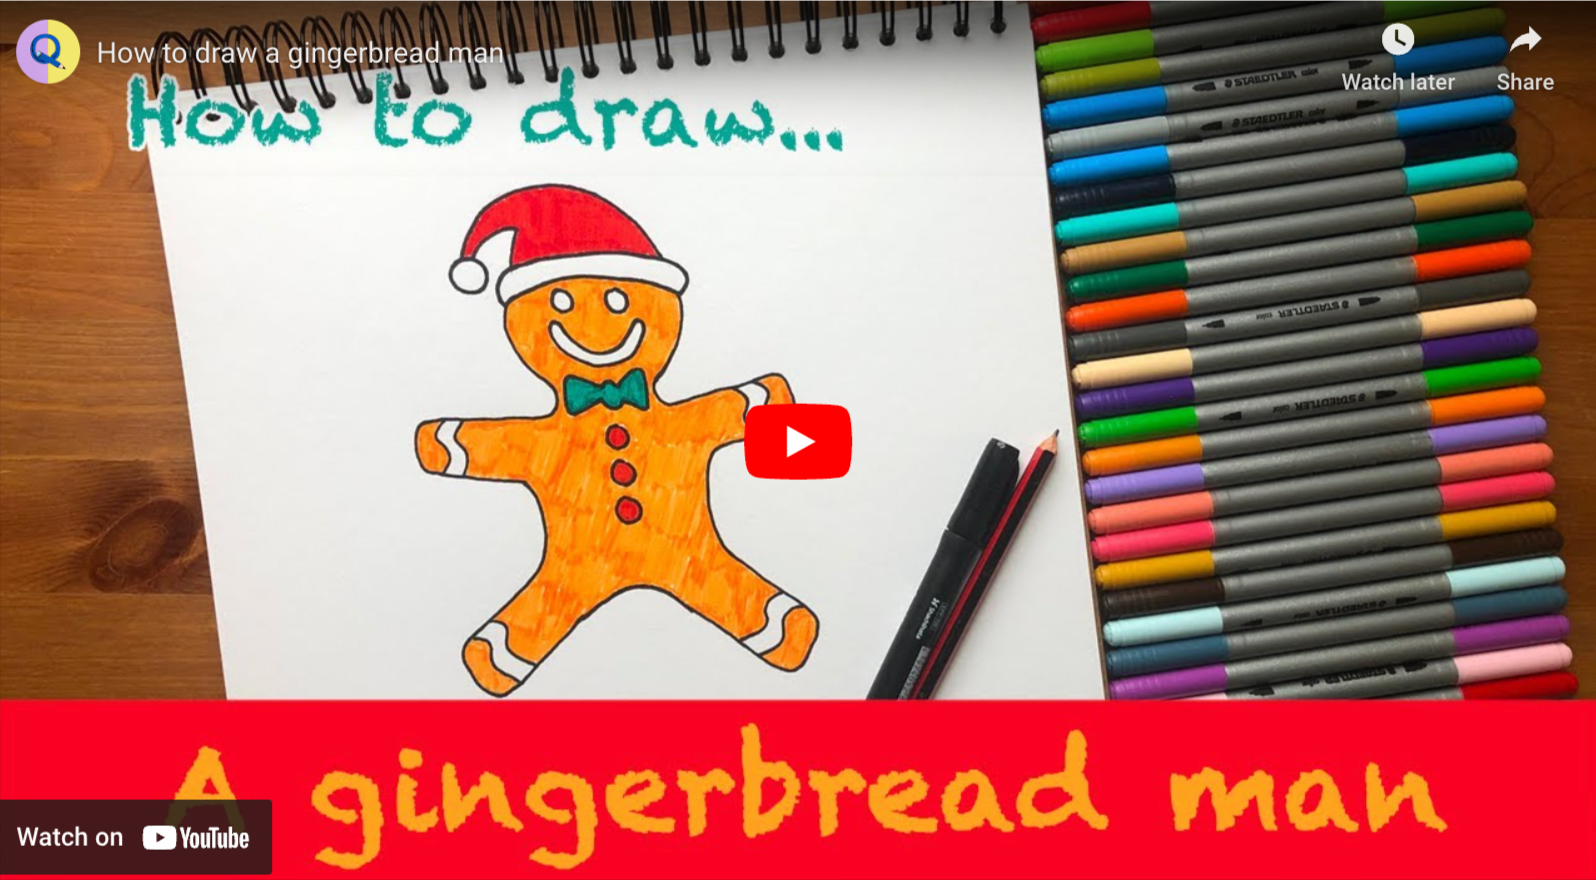 Load video: How to draw a gingerbread man video